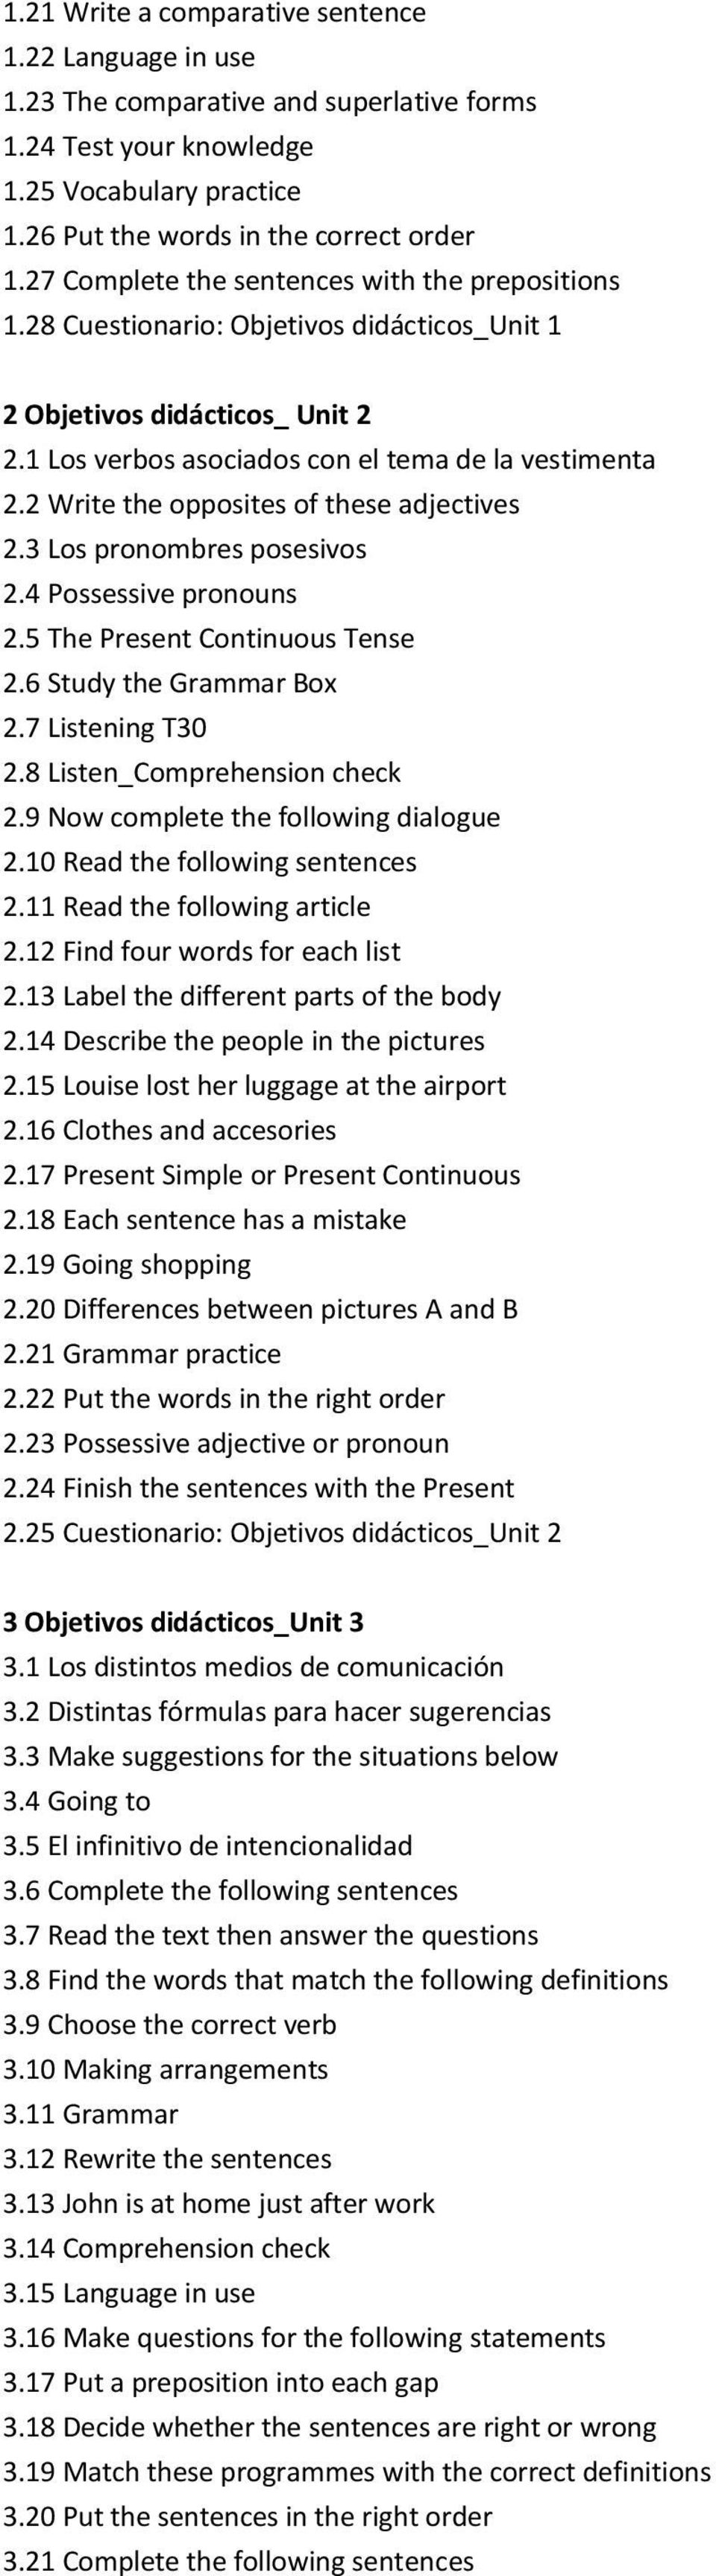 2 Write the opposites of these adjectives 2.3 Los pronombres posesivos 2.4 Possessive pronouns 2.5 The Present Continuous Tense 2.6 Study the Grammar Box 2.7 Listening T30 2.